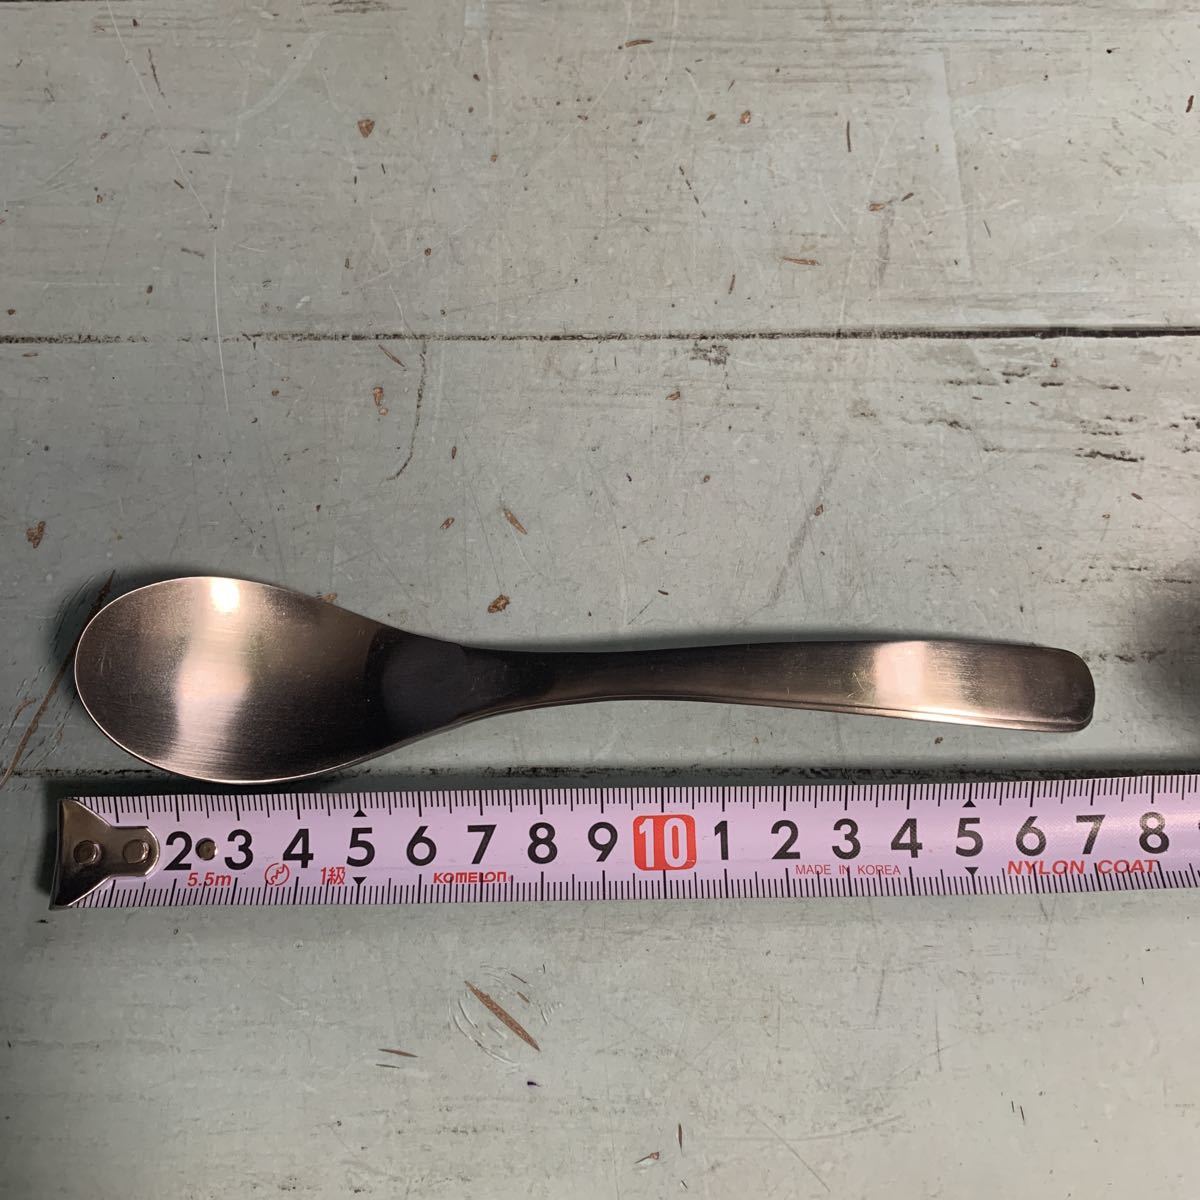 Made in TSUBAME cutlery spoon large 17.5cm× 2 ps stamp entering (7689)